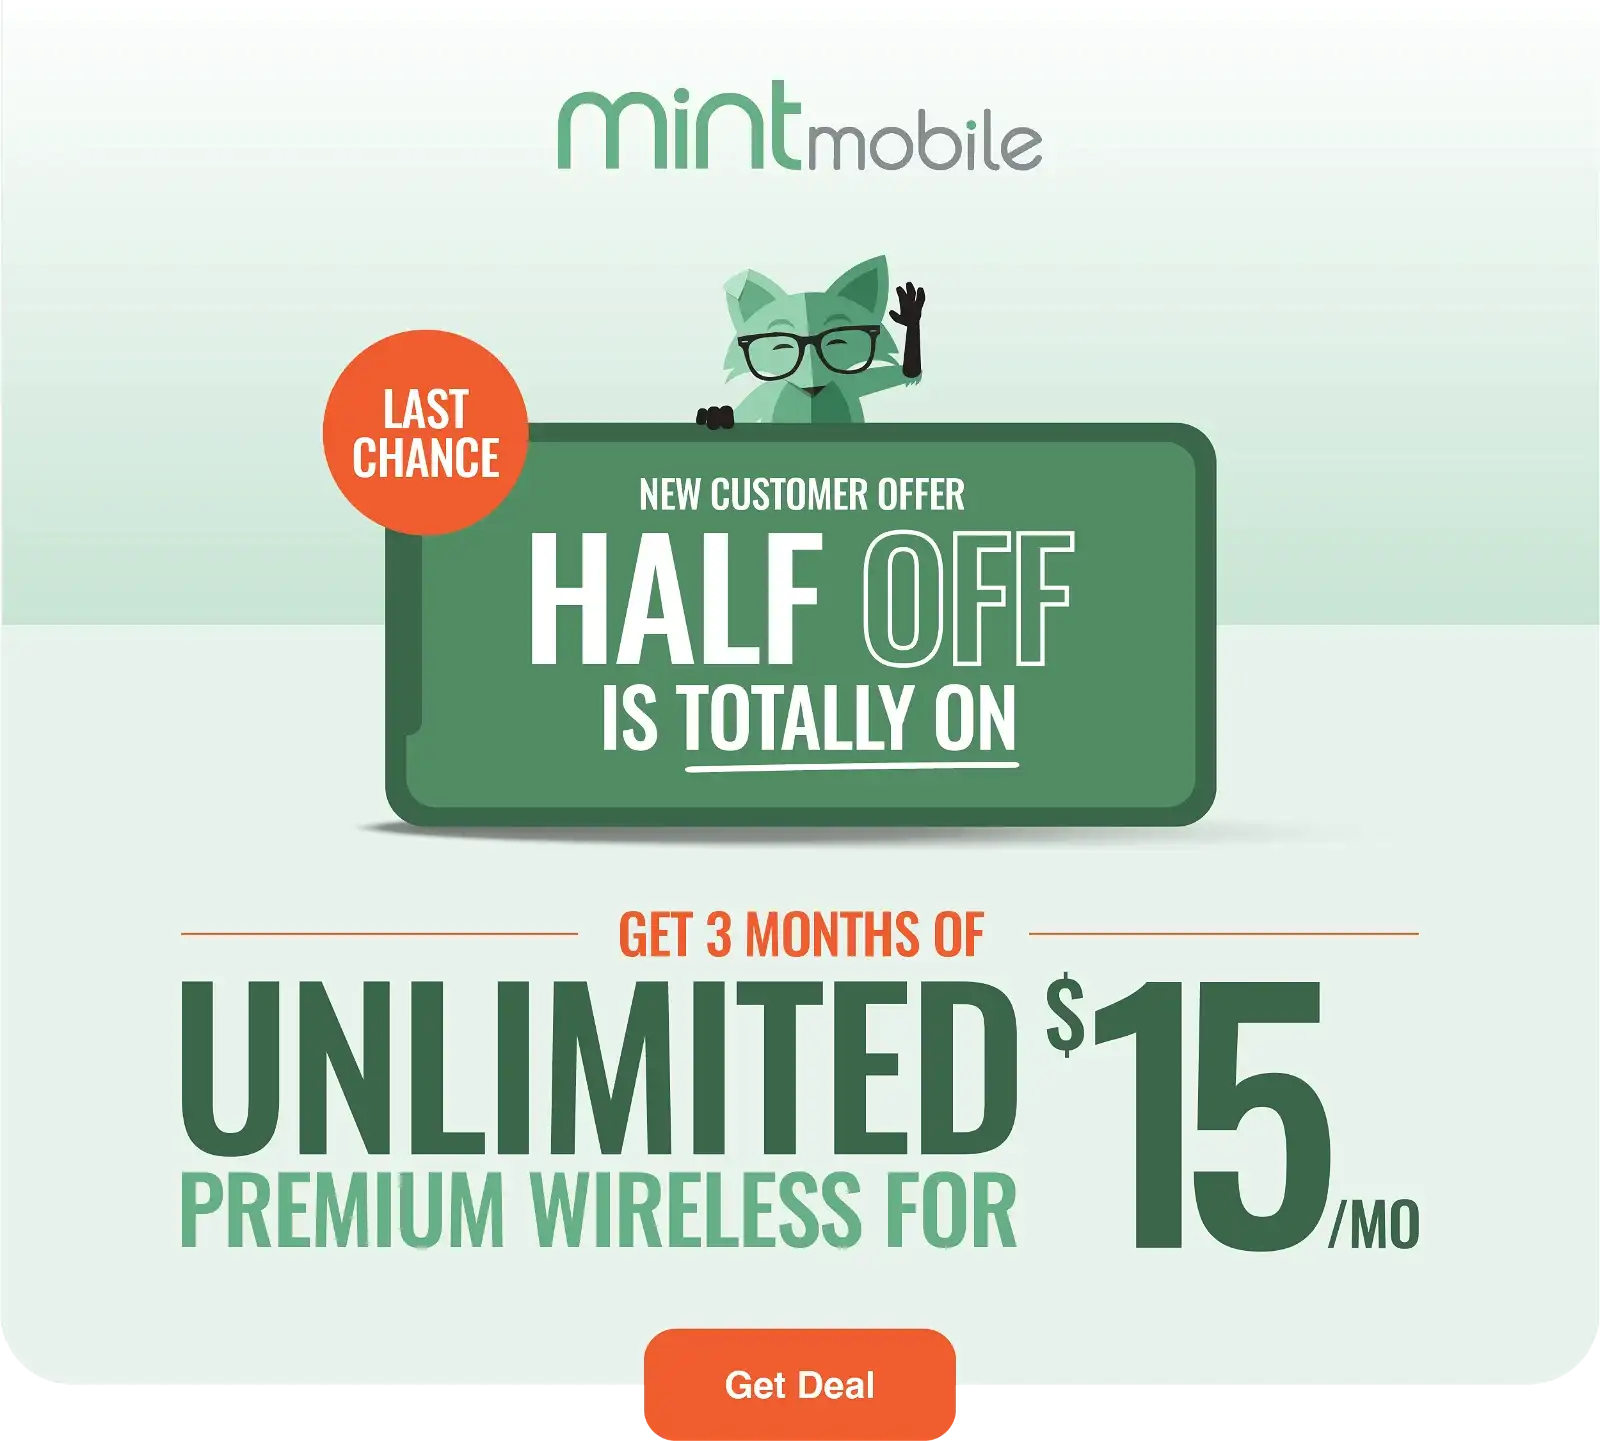 Half off is totally on...Get 3 Months of Unlimited Premium Wireless for \\$15/mo